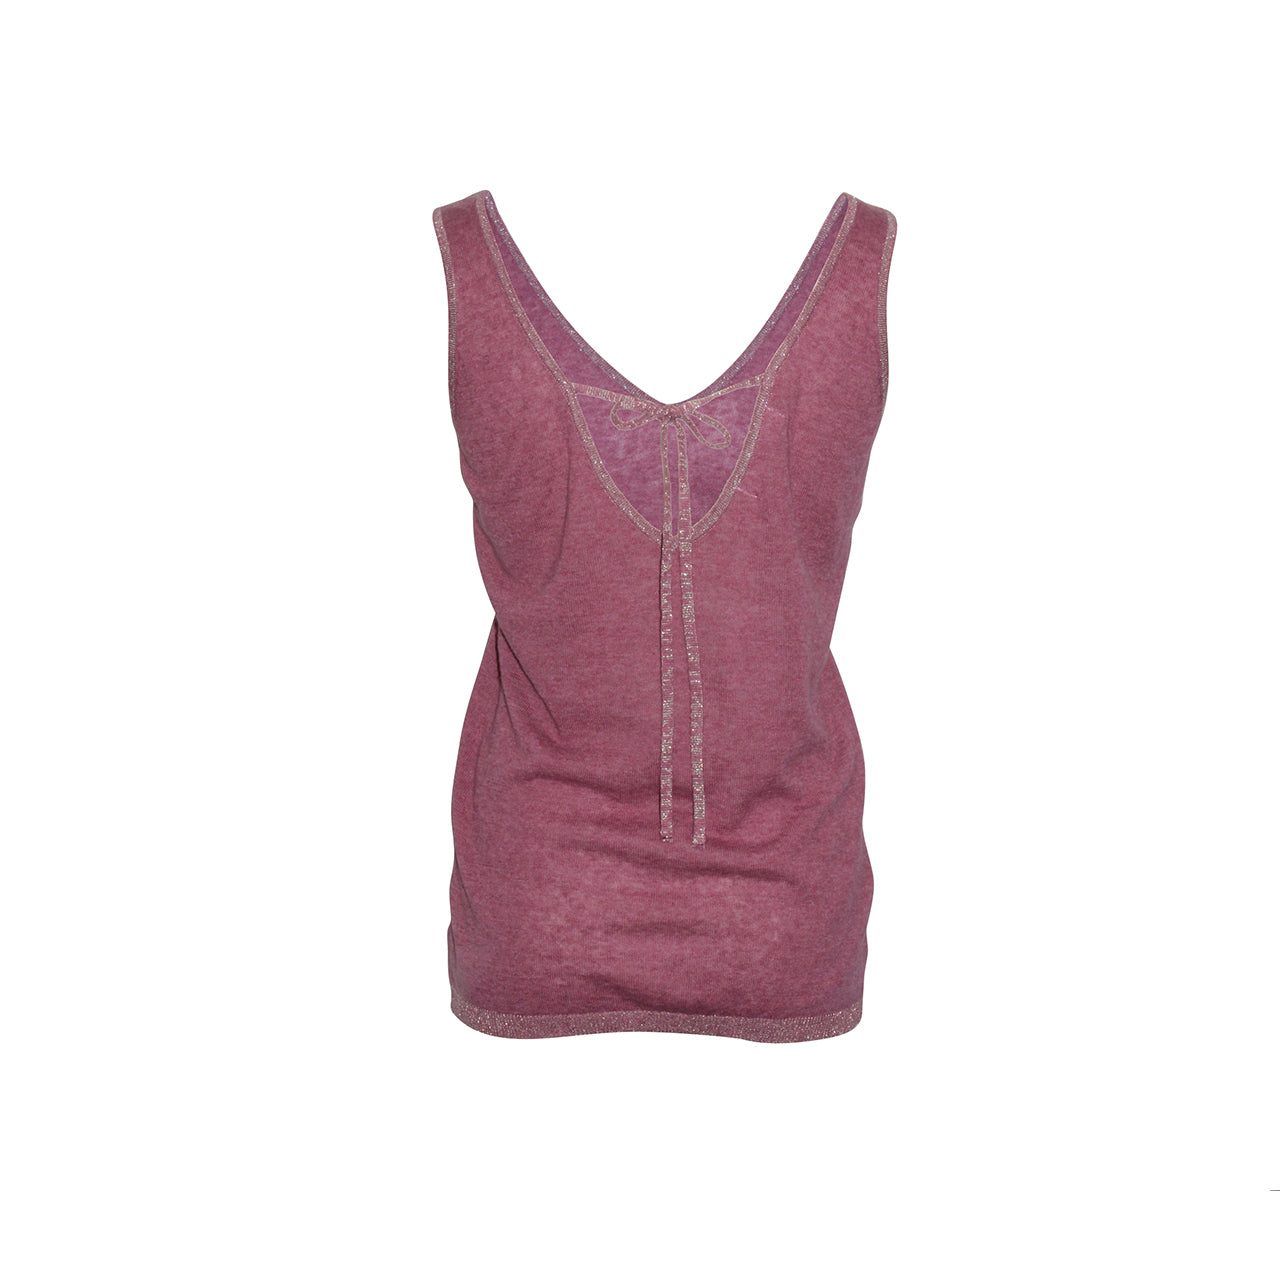 GINA Knit Tie-Up Tank Top Must-Have